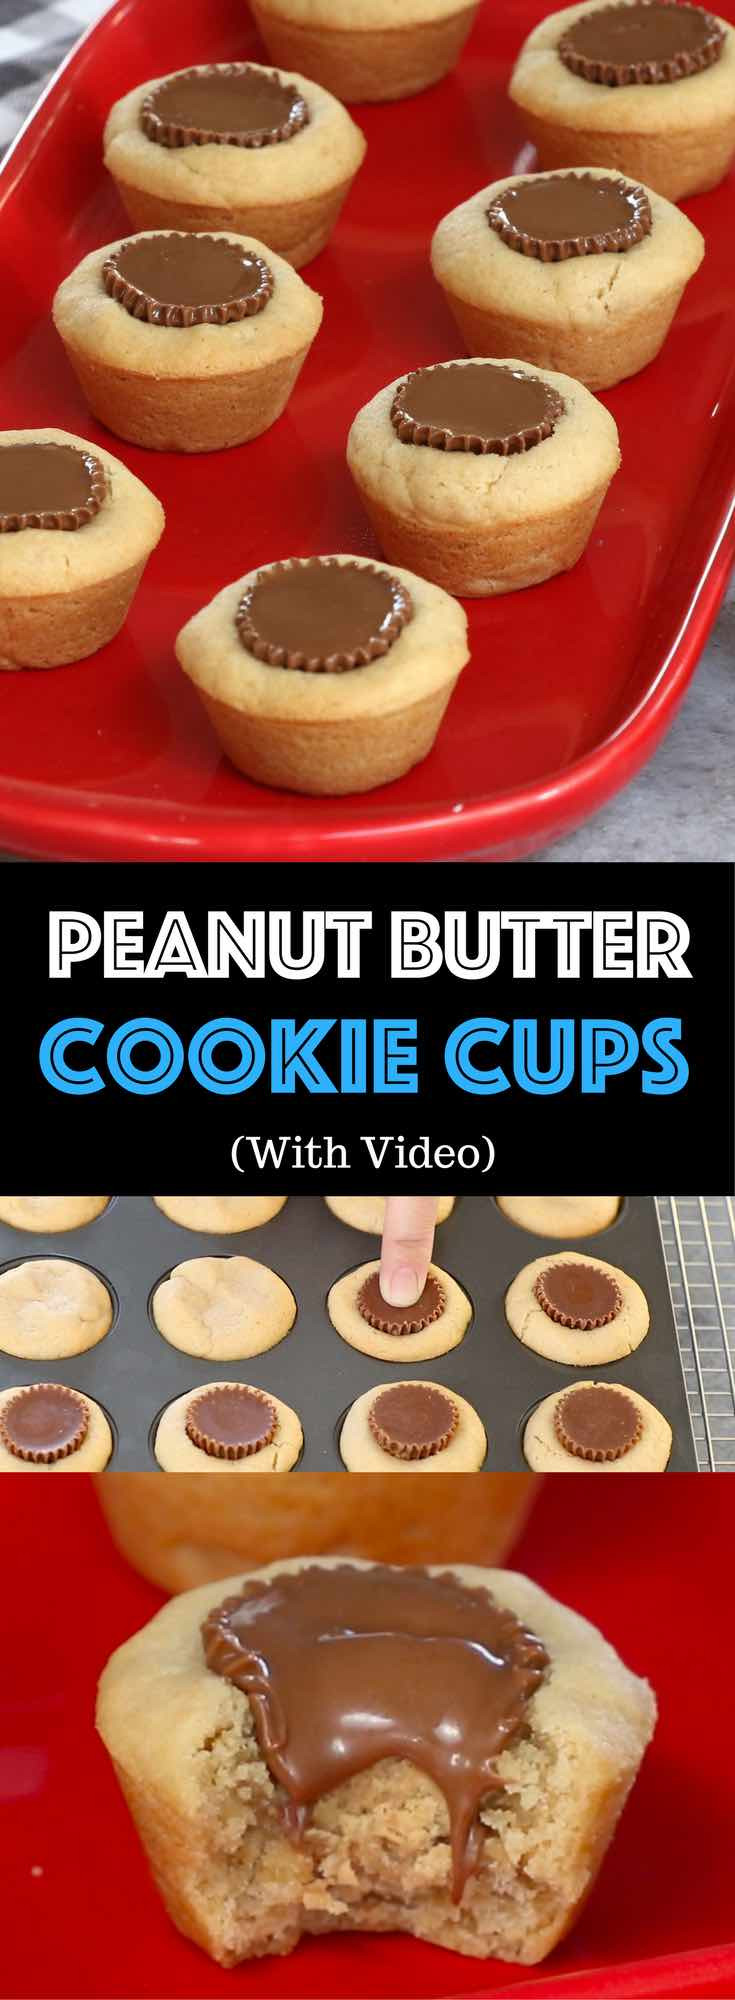 Peanut Butter Cookies With Peanut Butter Cups
 Reese s Peanut Butter Cup Cookies Recipe with Video